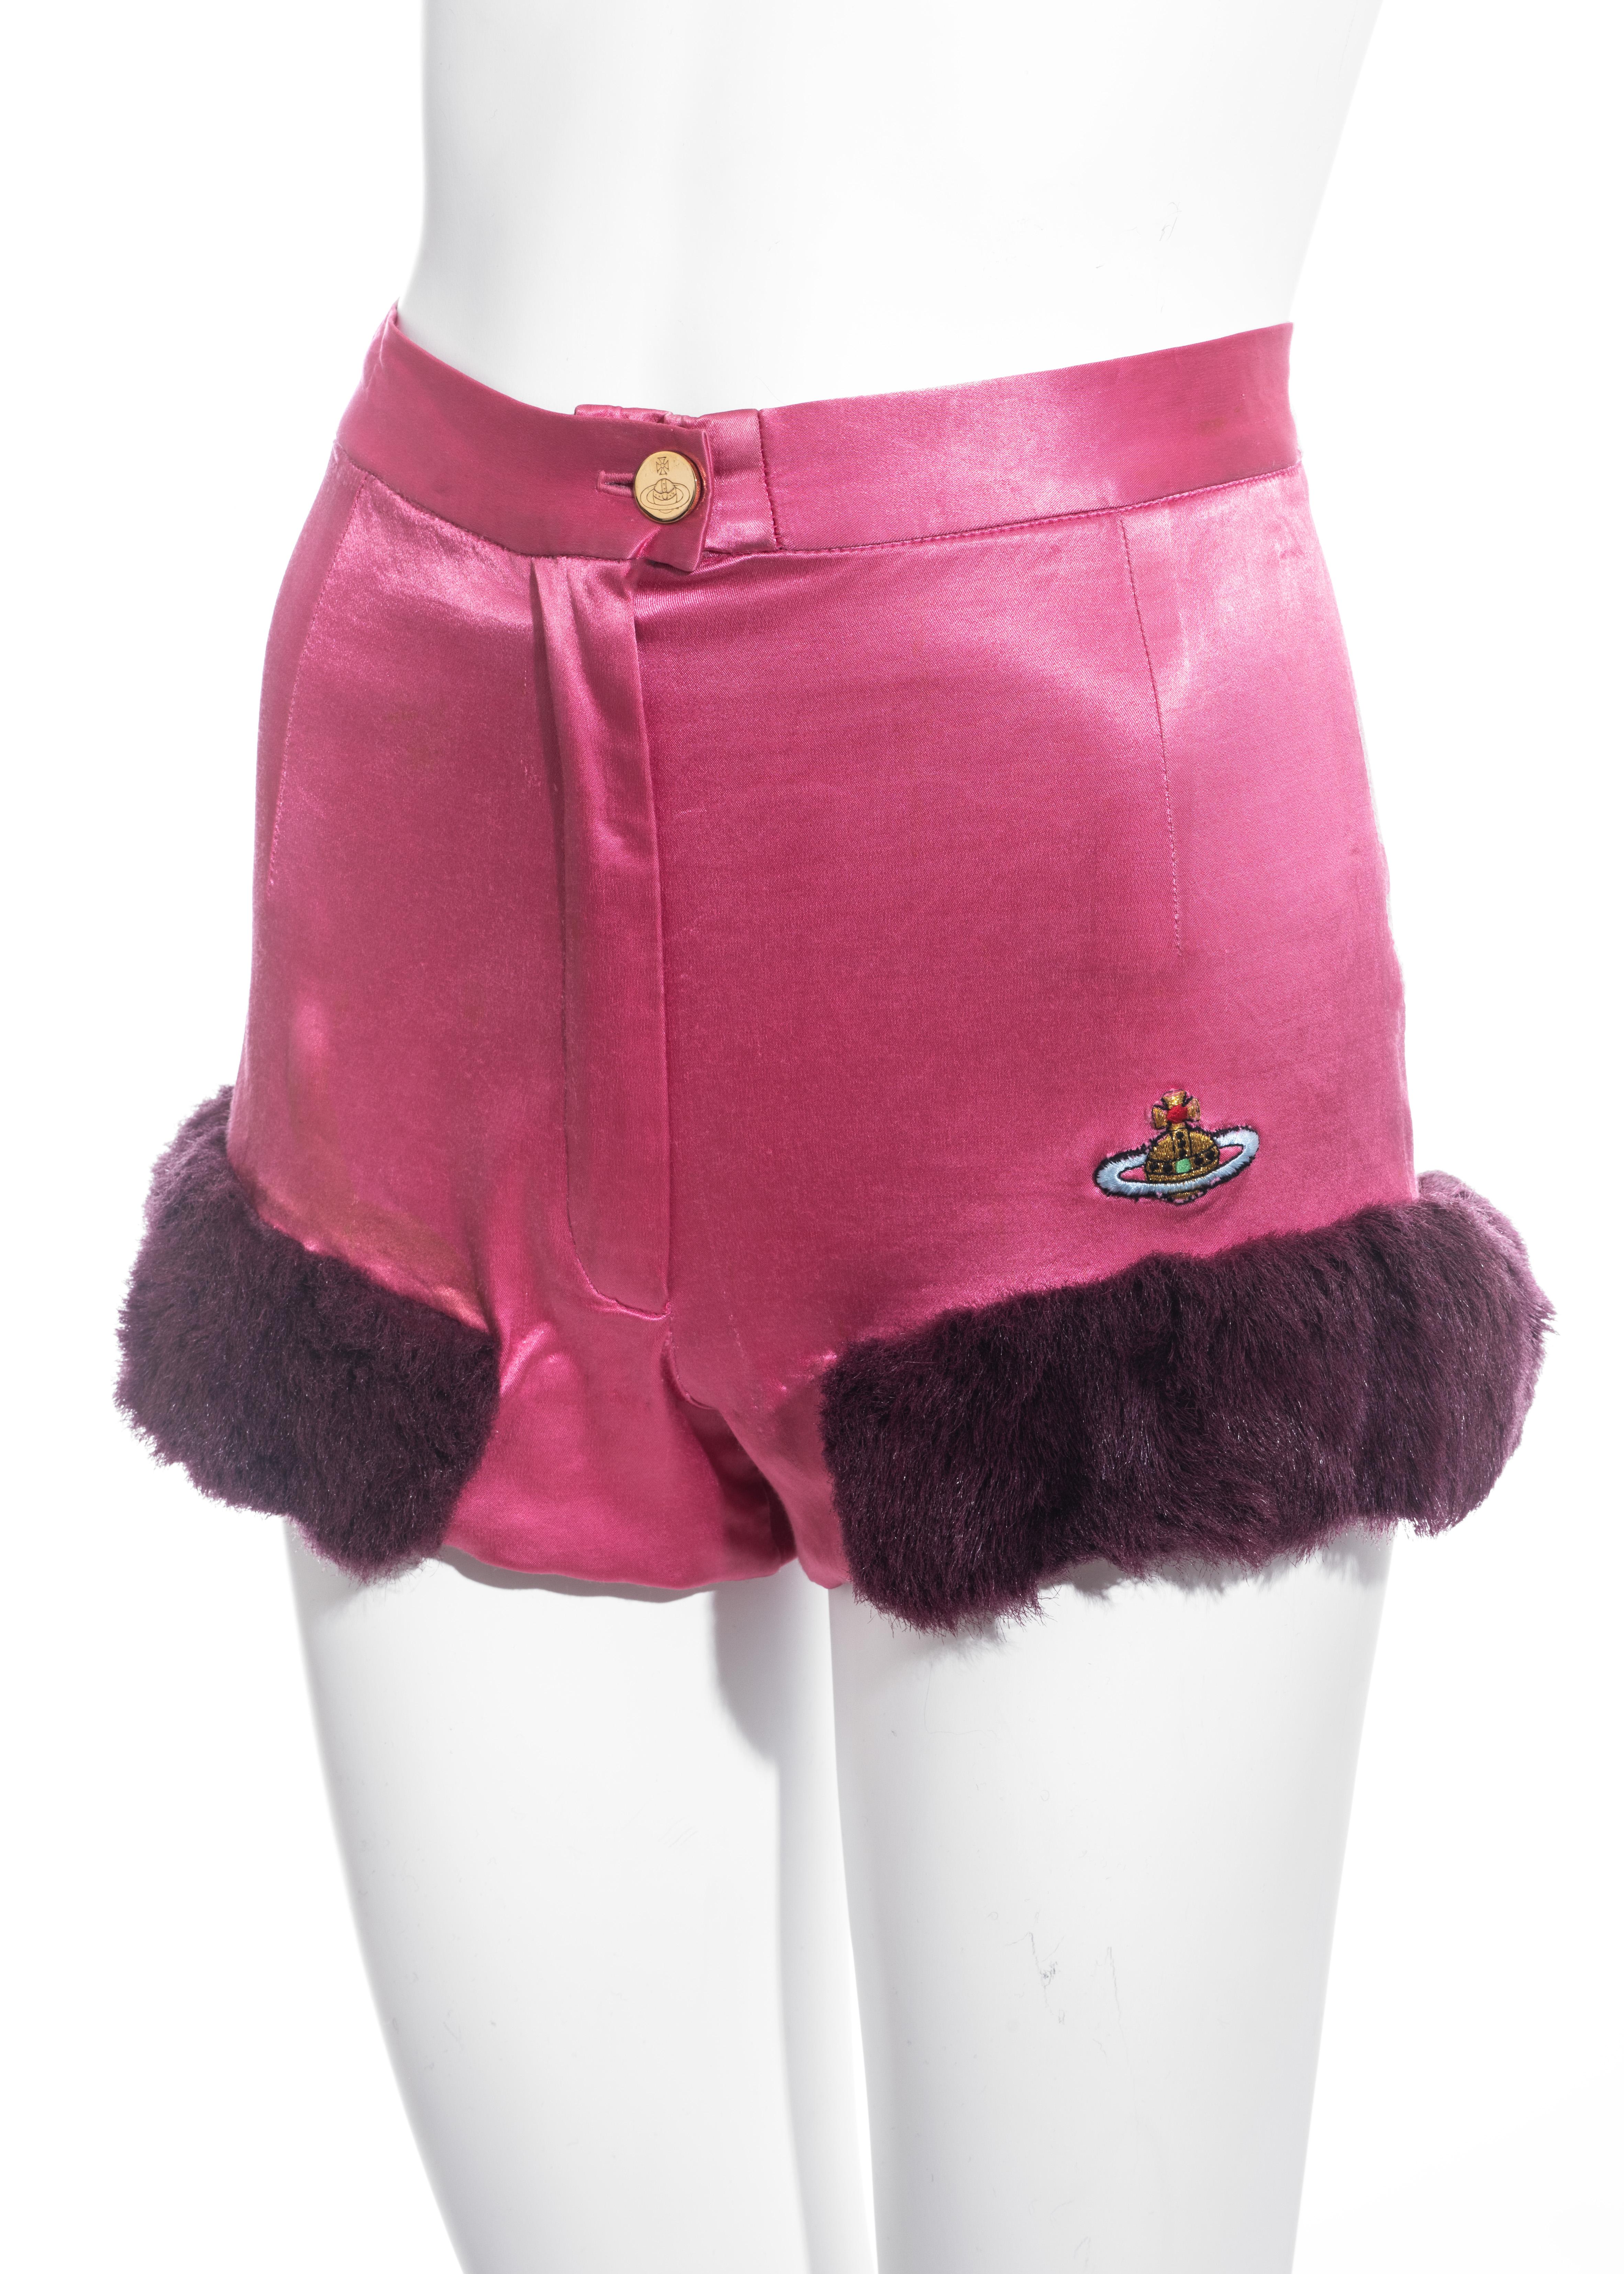 ▪ Vivienne Westwood pink satin mini shorts / hot pants
▪ Purple faux fur trim 
▪ Embroidered Orb logo 
▪ Gold orb button 
▪ Zip-up fly 
▪ UK 12 - FR 40 - US 8
▪ Fall-Winter 1991